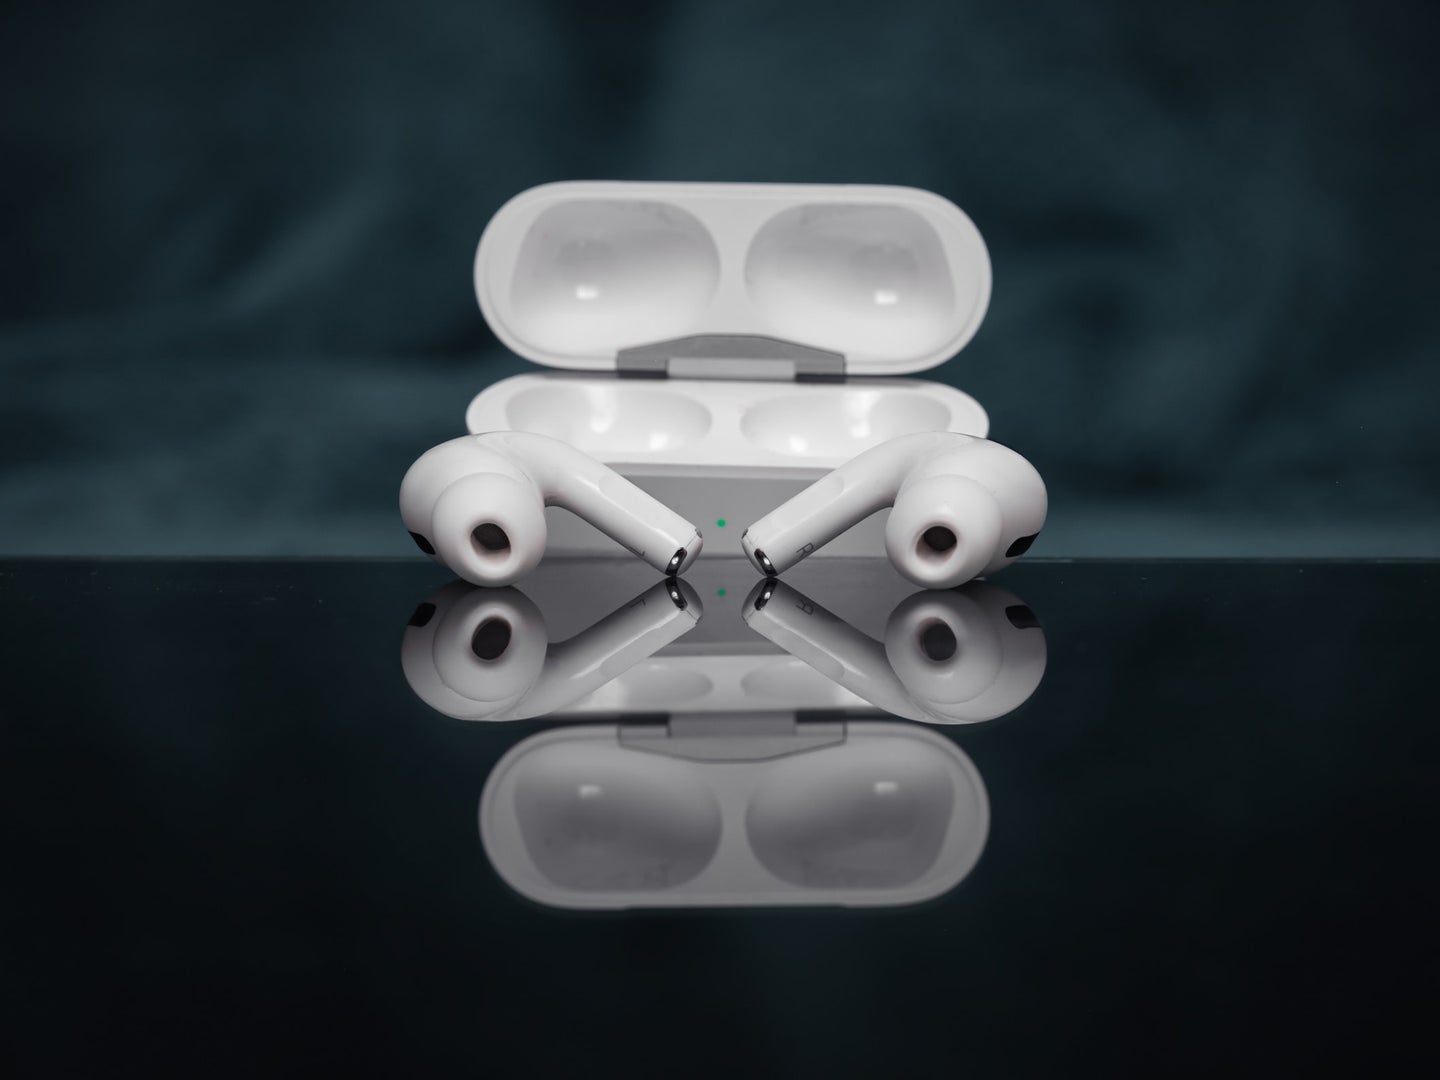 A pair of Apple's AirPods Pro on a reflective black surface, in front of their case.